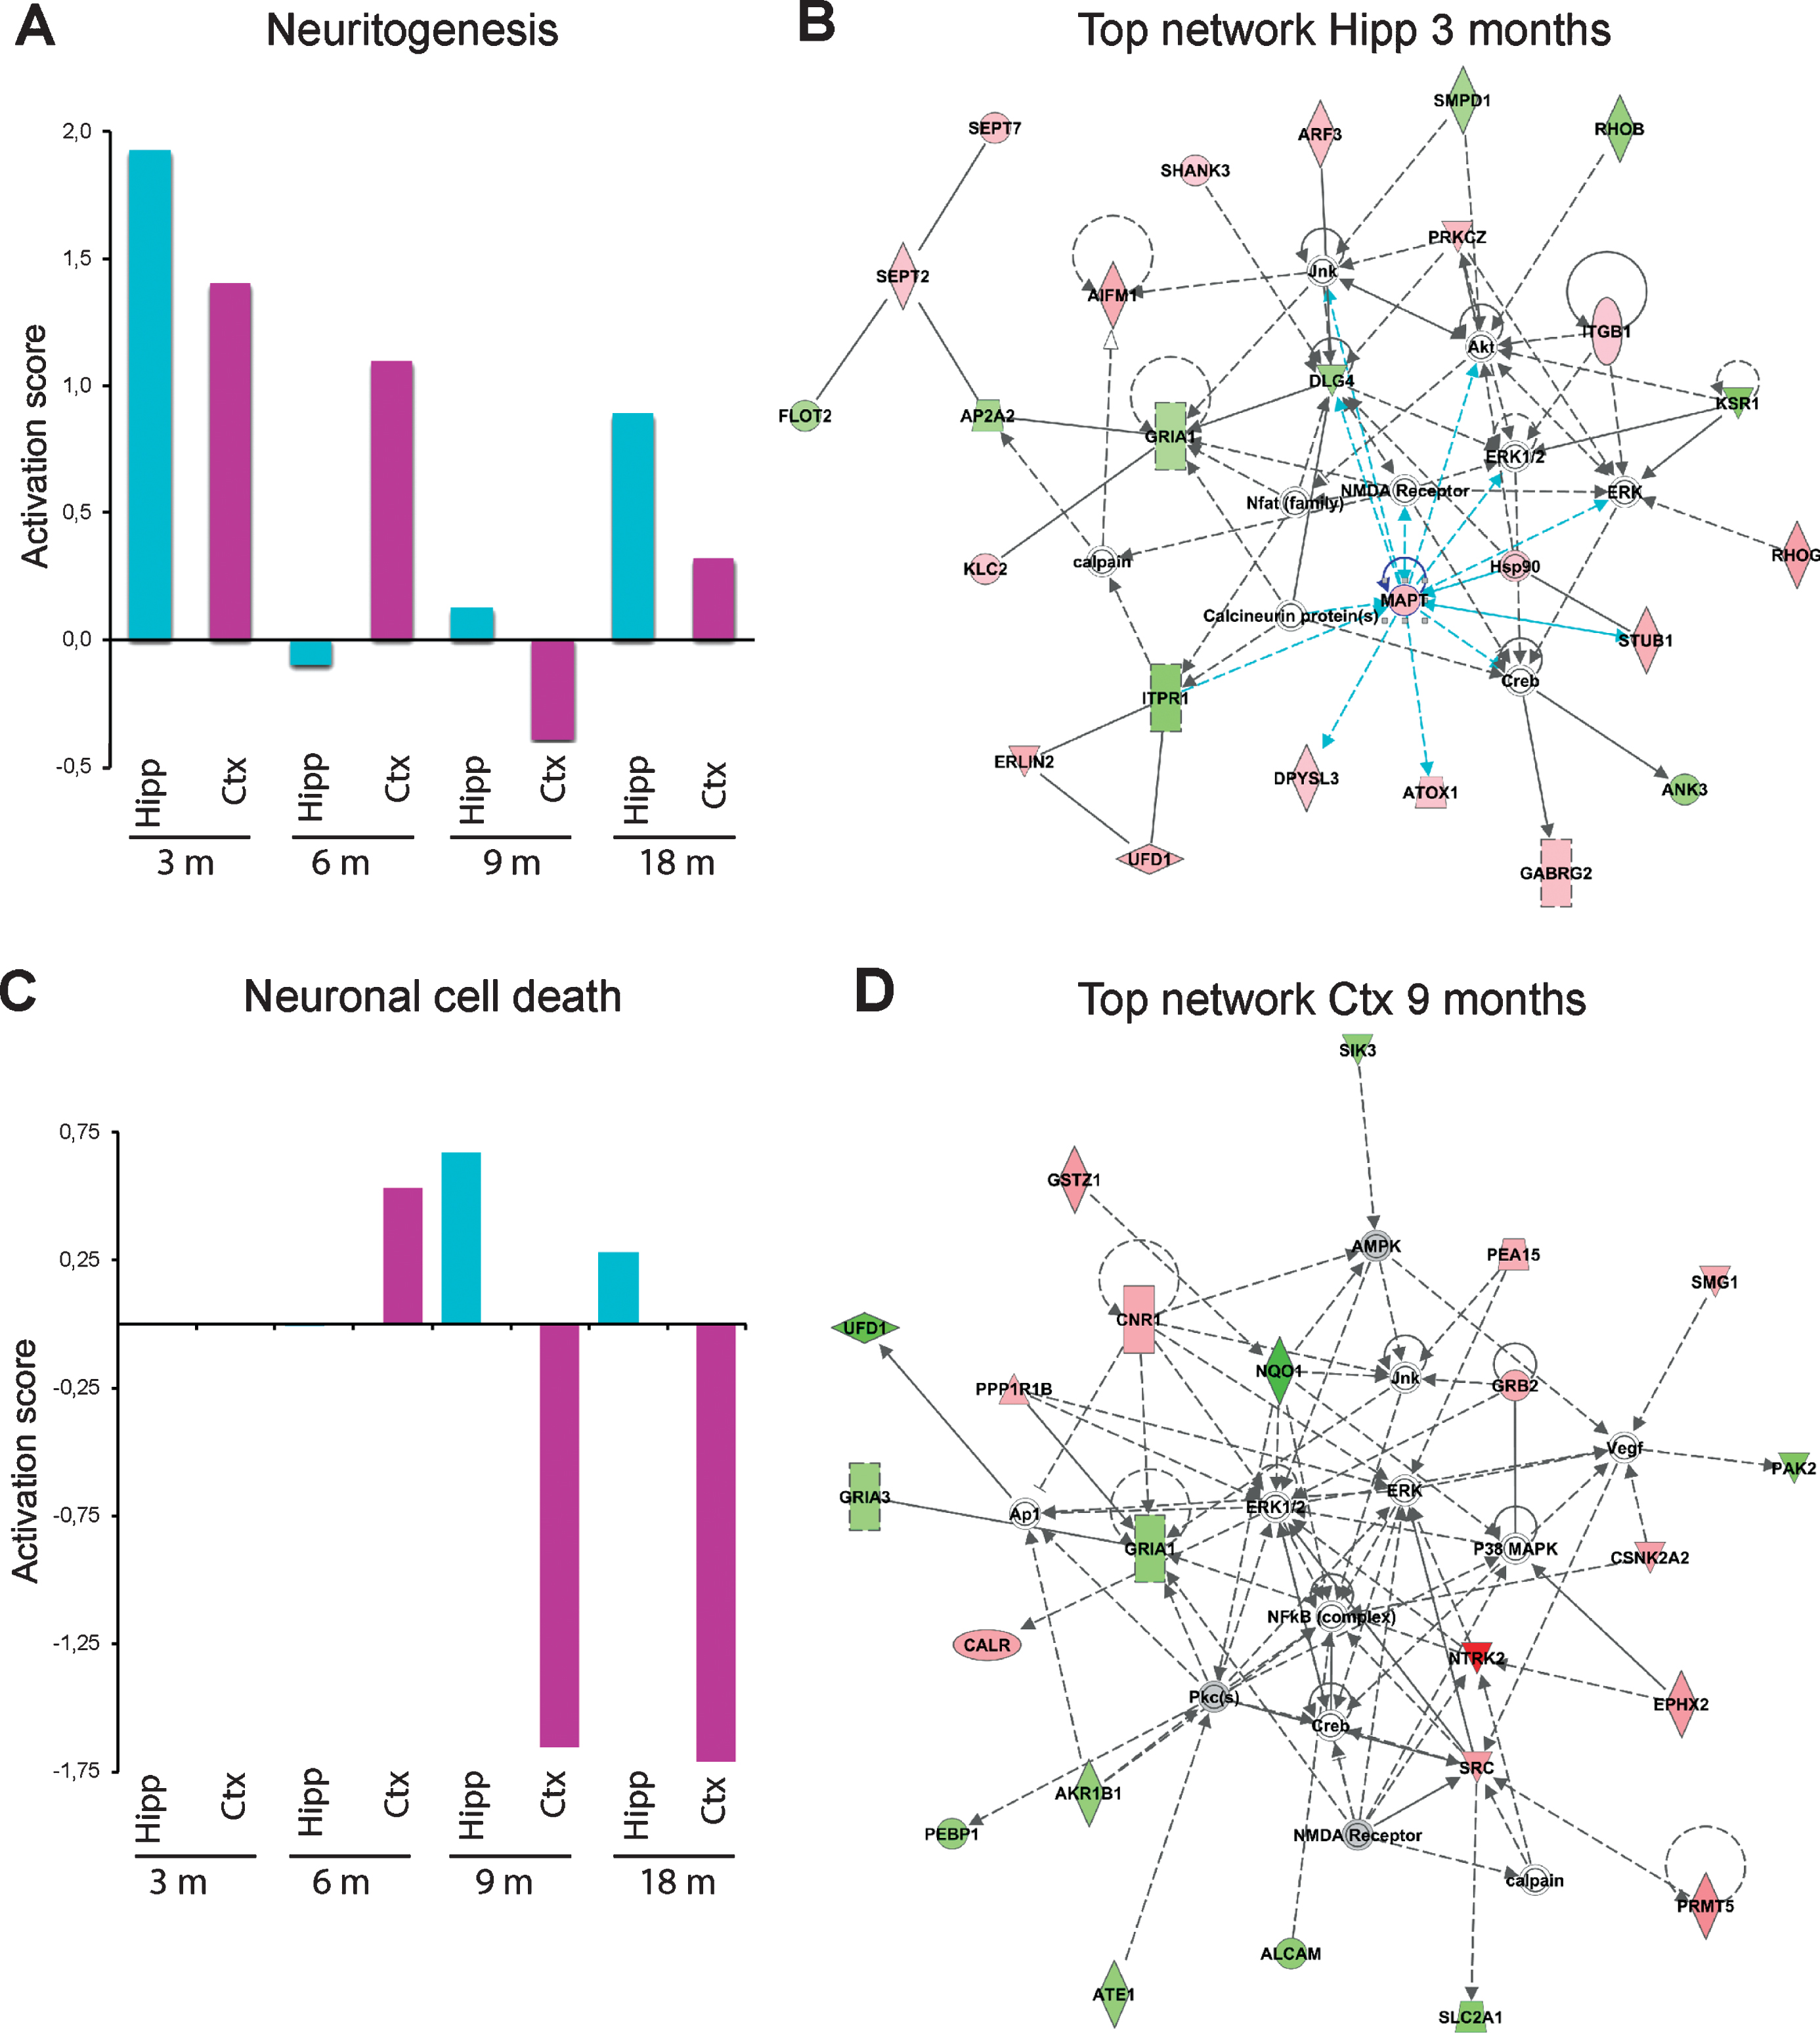 Effects on neuritogenesis and neuronal cell death and top-ranked networks in AppNL-F/NL-F mice over time. Proteins found to have an altered level in hippocampus and cortex in AppNL-F/NL-F compared to Appwt/wt mice (1.1-fold alteration, p < 0.1) were subjected to IPA analysis. a) Activation scores for neuritogenesis over time. b) Top-ranked IPA network in hippocampus at 3 months of age. c) Activation scores for neuronal cell death over time. d) Top-ranked network in cortex at 9 months of age.